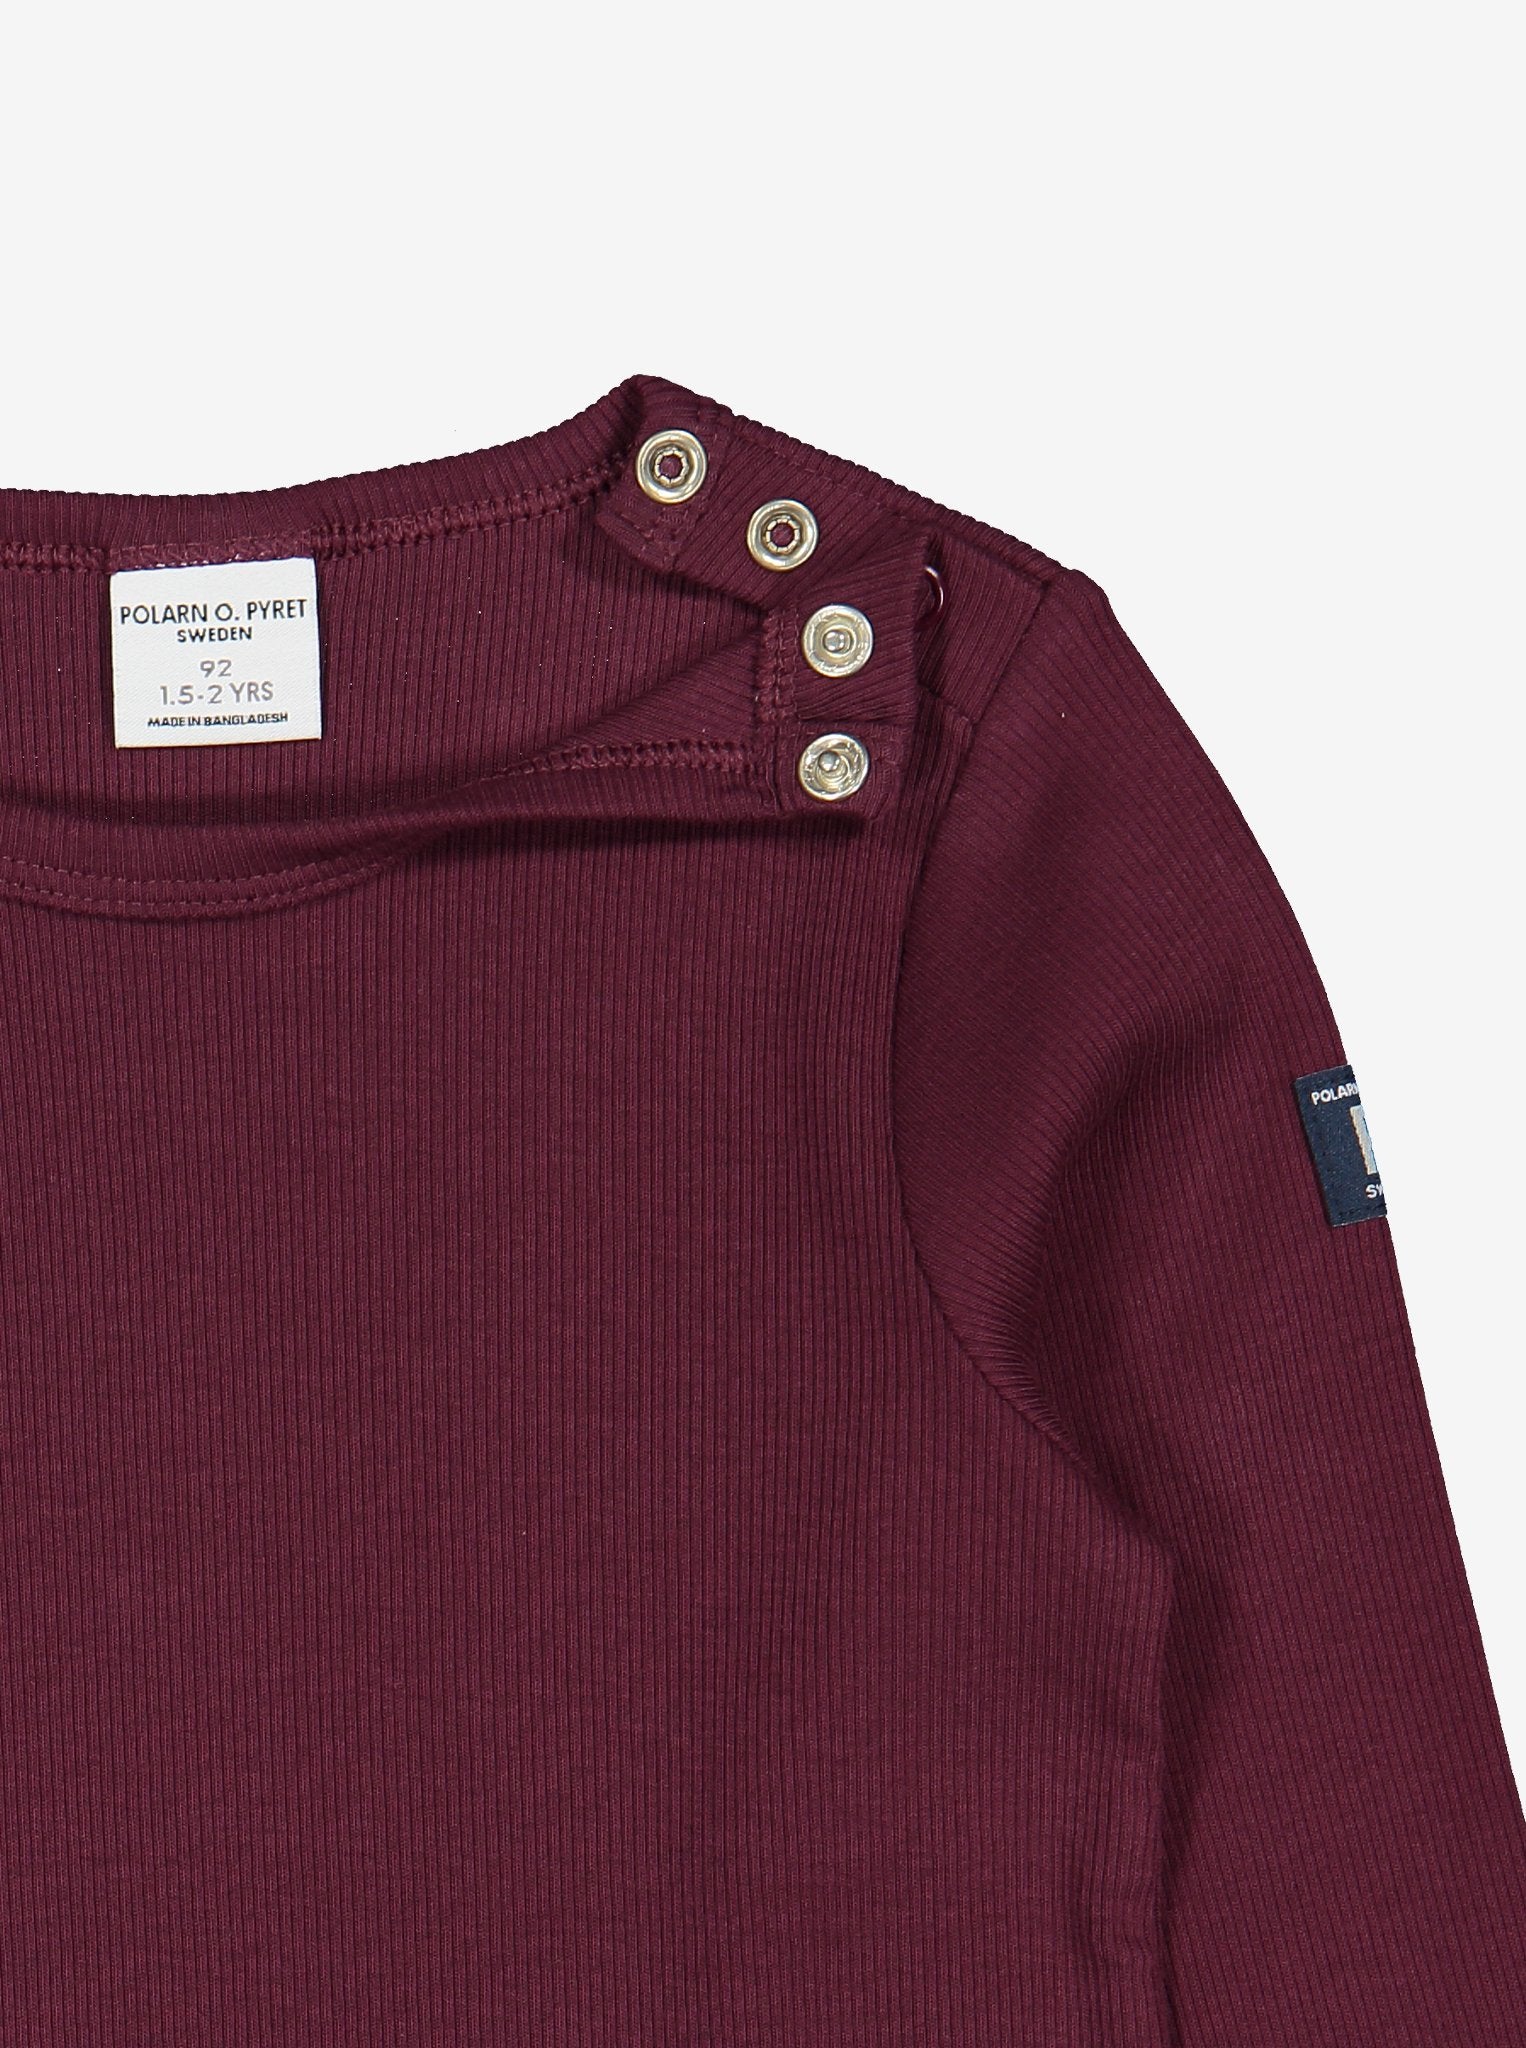 Close up view of kids burgundy red top with helpful poppers on one shoulder for easy dressing. Made in soft organic cotton